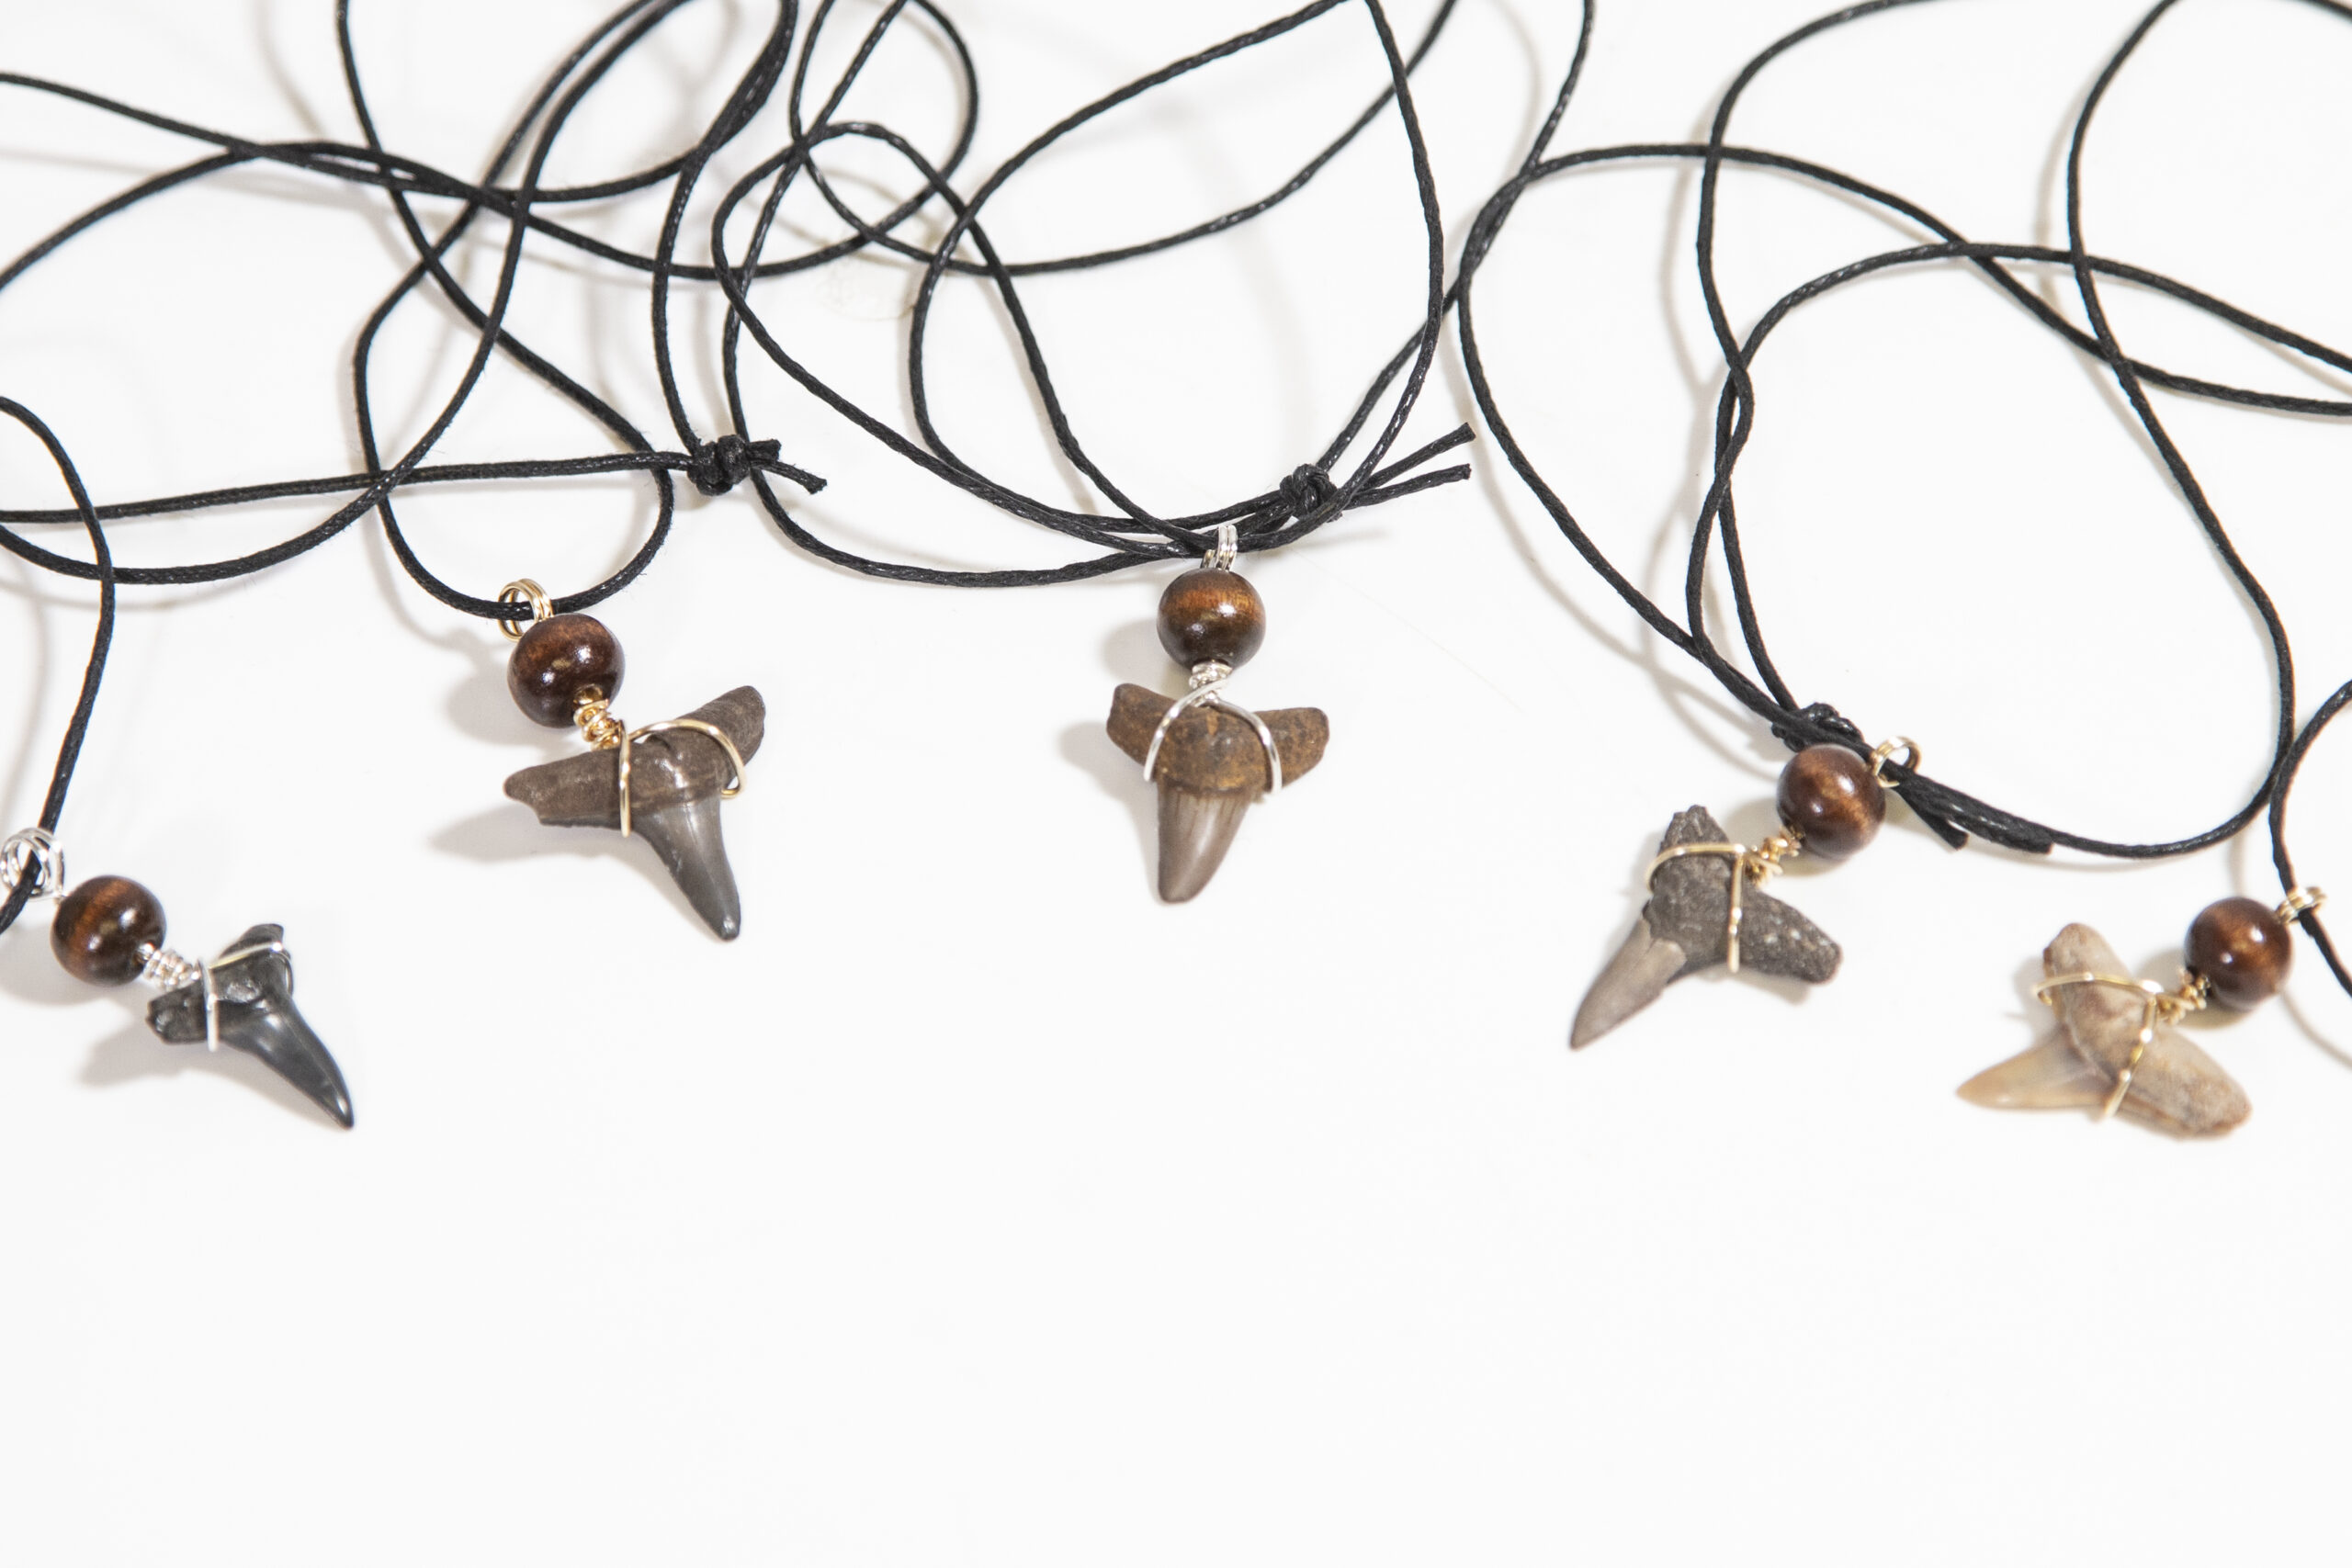 Shark Tooth Necklace | Shark Tooth Jewelry | Pendant Necklace | Long  Necklaces | Beads Chain - Necklaces - Aliexpress